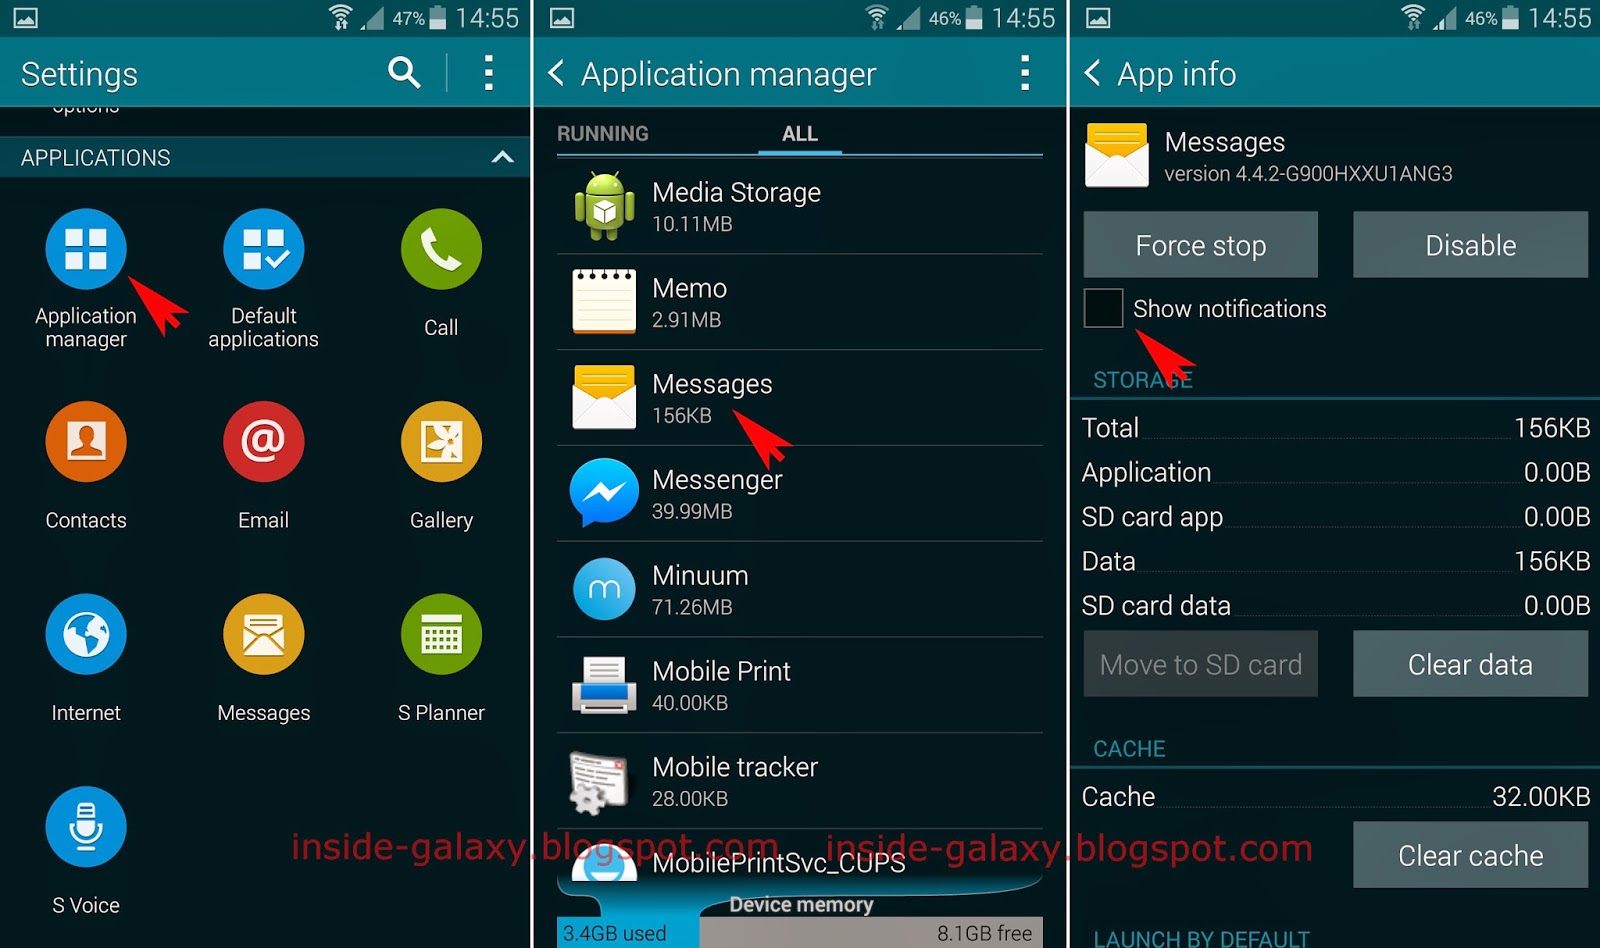 Inside Galaxy Samsung Galaxy S5 How to Disable an App 